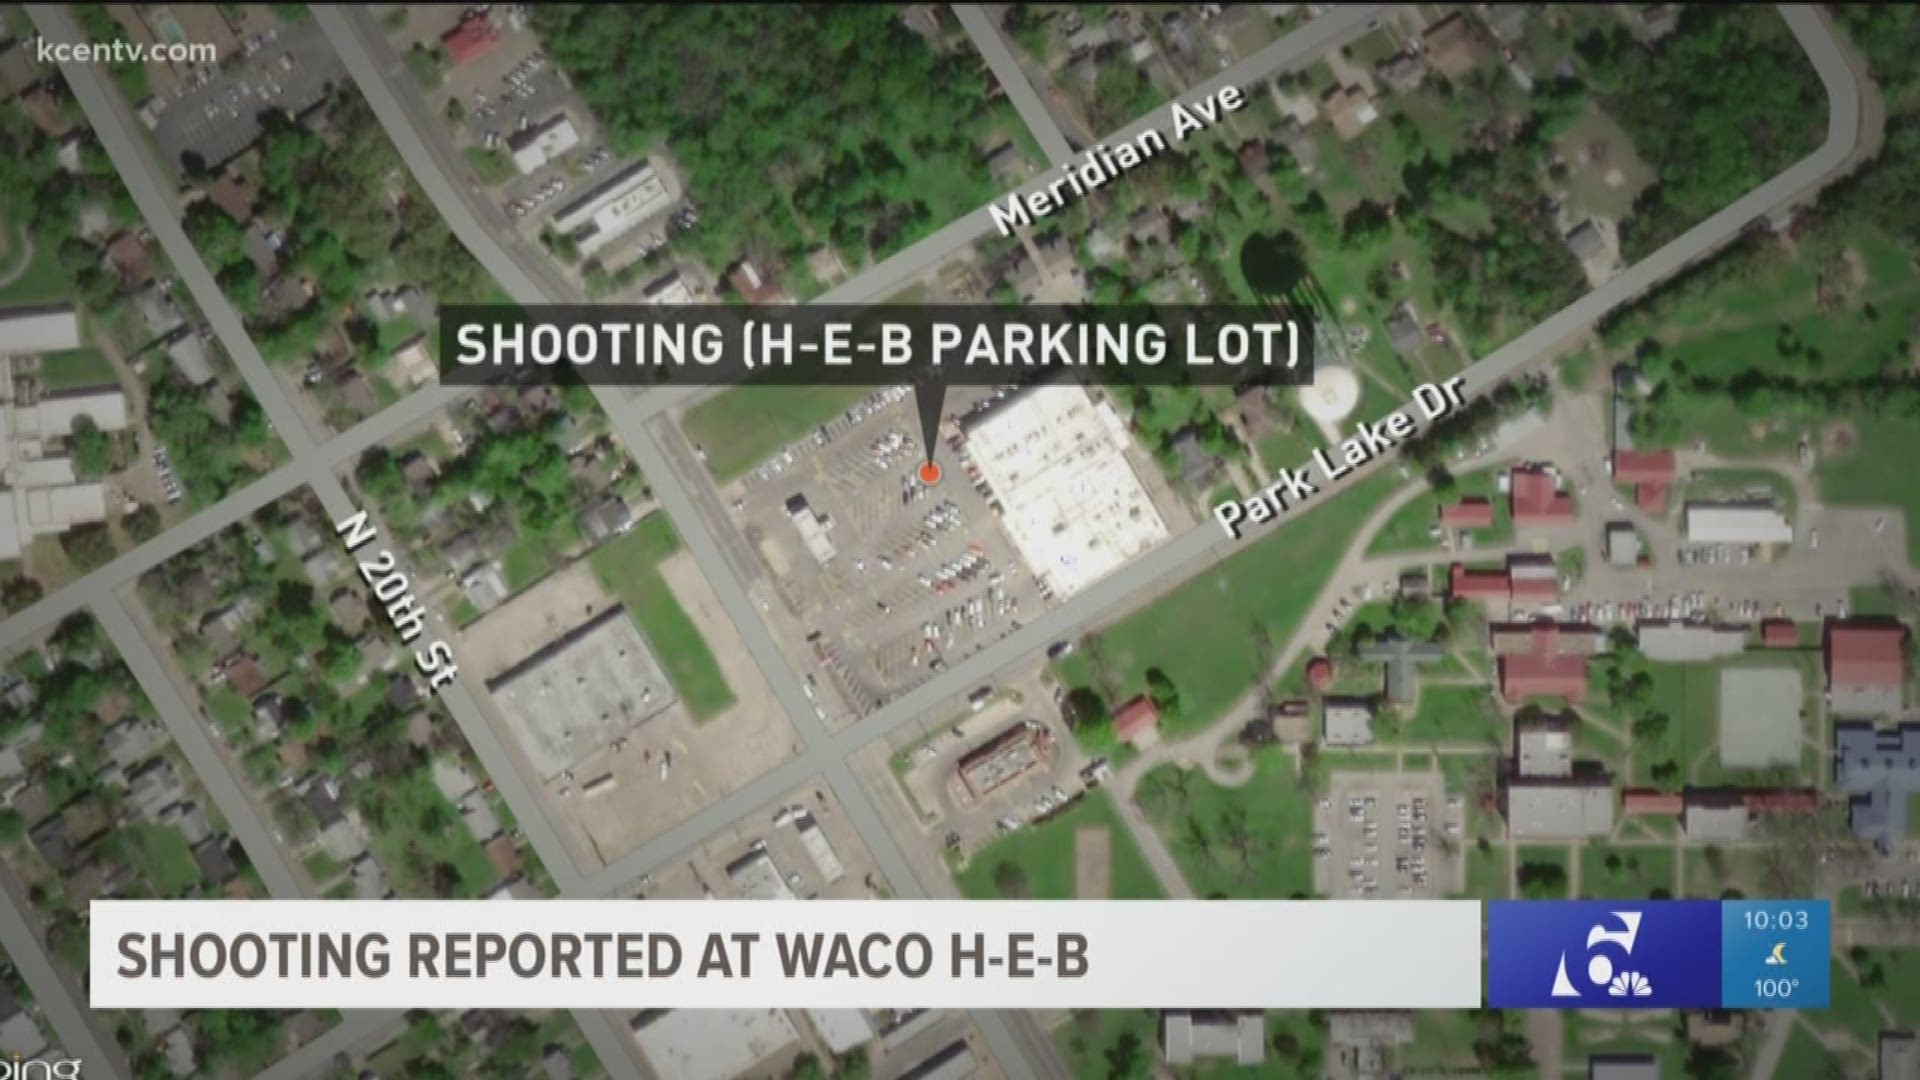 Police are searching for three suspects believed to have been involved in the shooting that left one victim with a gunshot wound to the head.